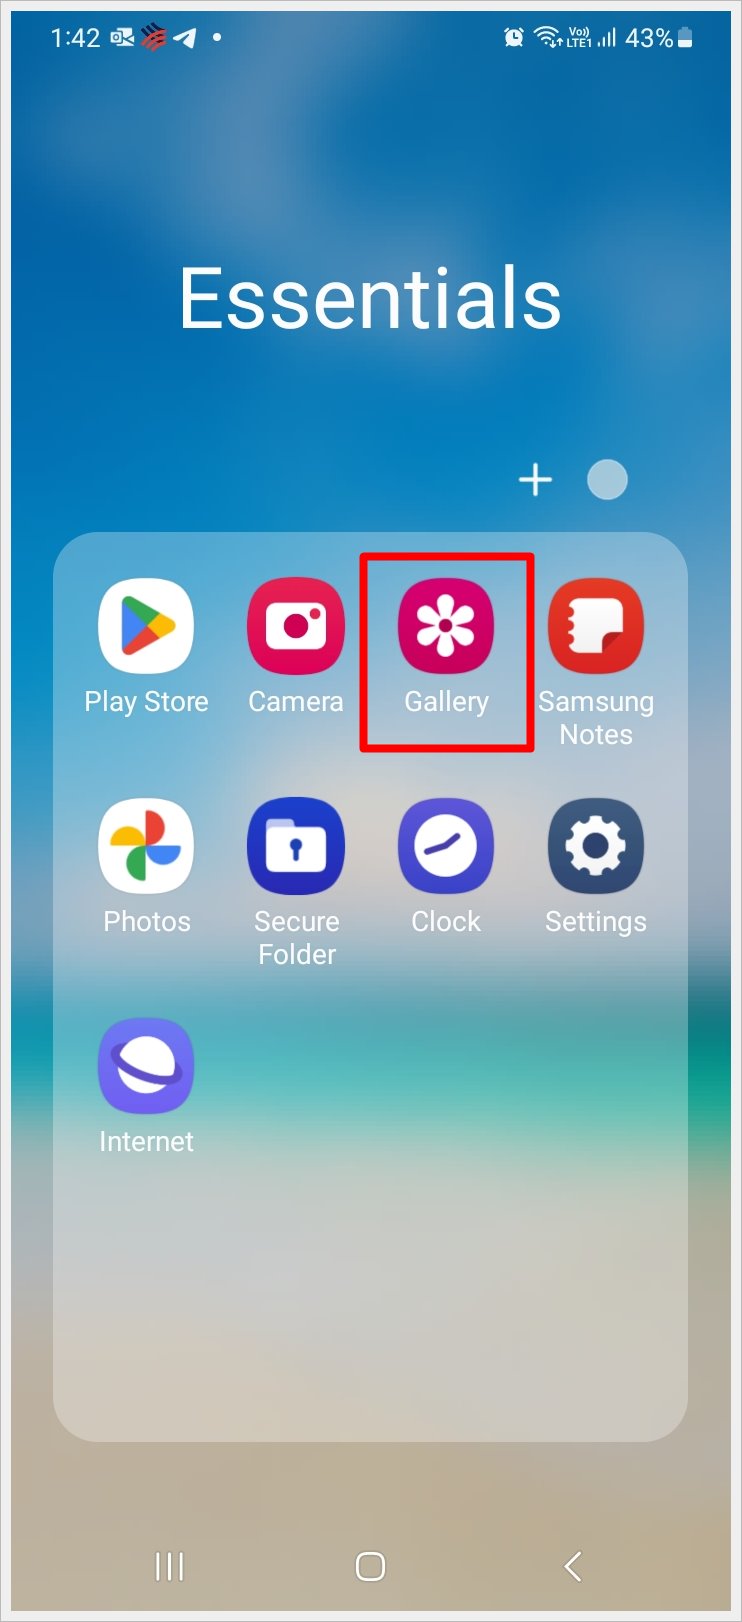 This image shows a screenshot of a Samsung Galaxy phone with the 'Gallery' icon highlighted.